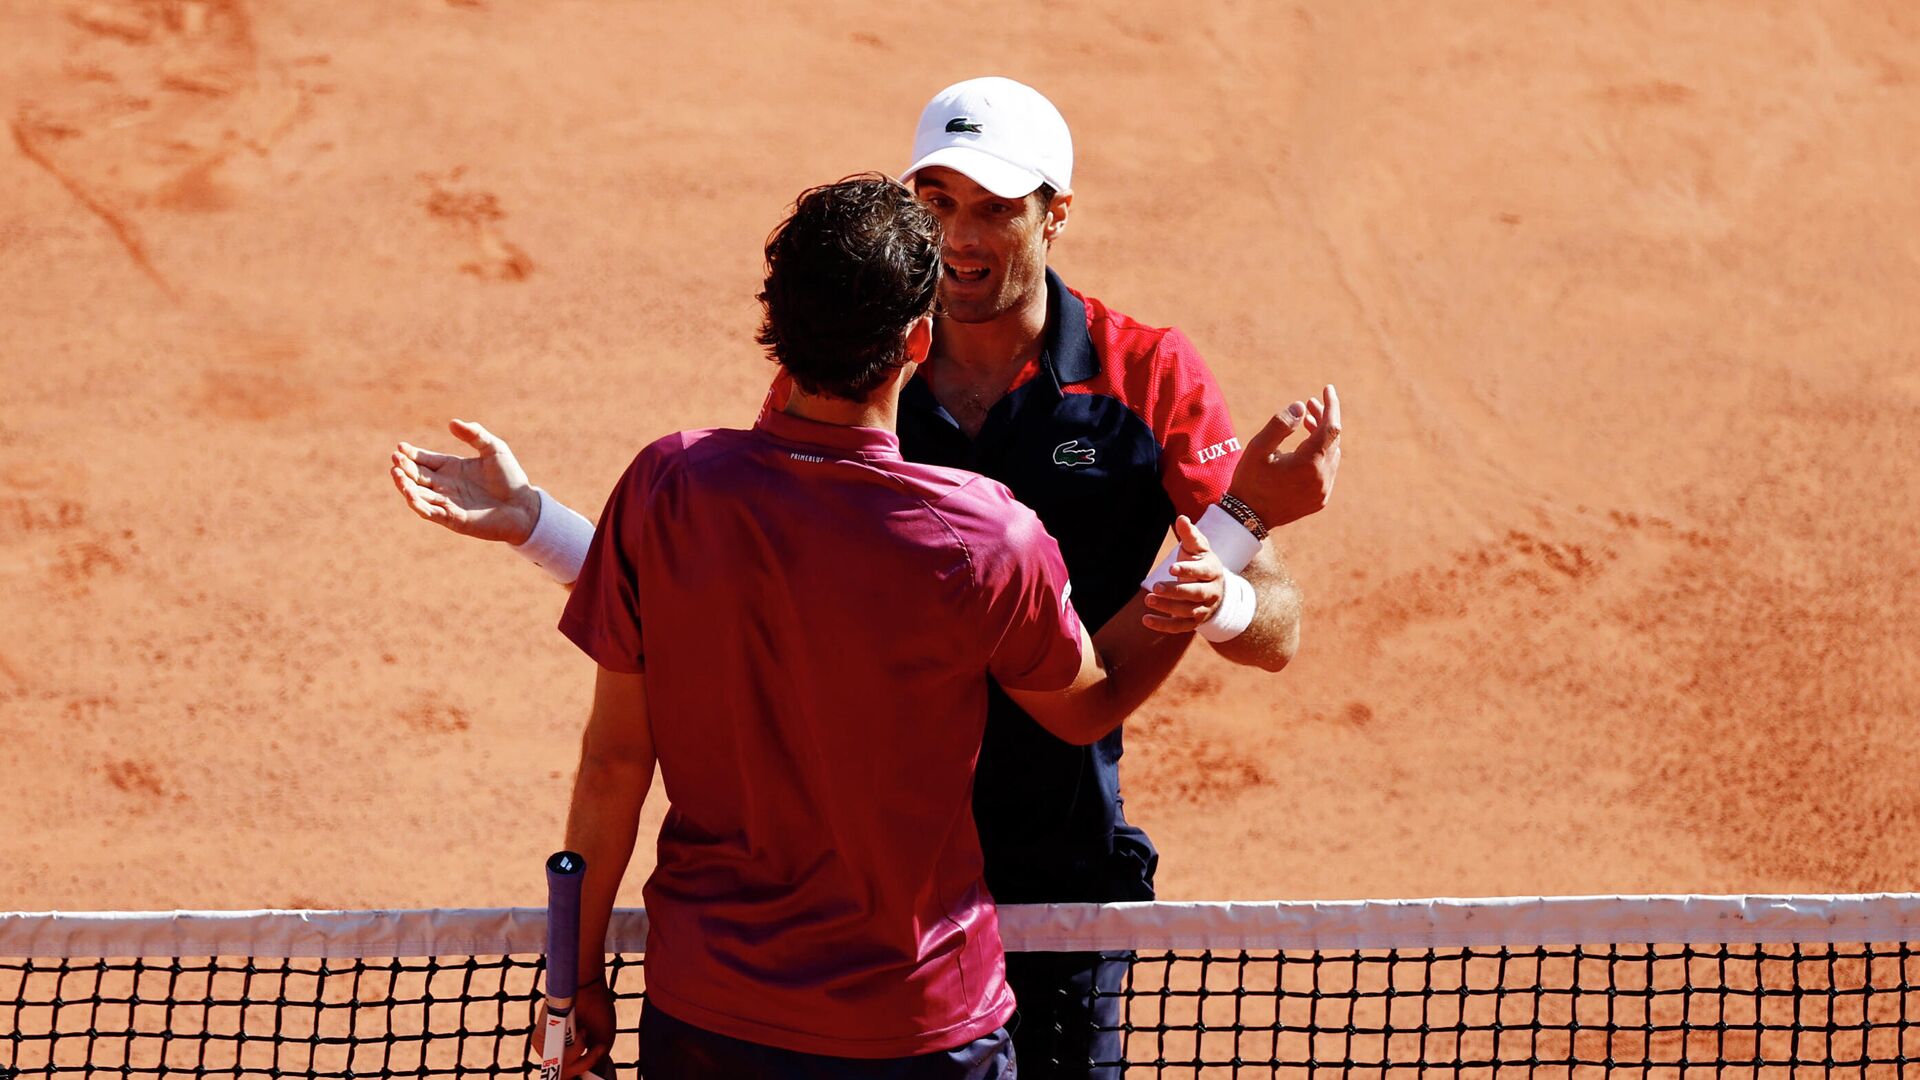 Tennis - French Open - Roland Garros, Paris, France - May 30, 2021 Spain's Pablo Andujar shakes hands with Austria's Dominic Thiem after winning his first round match REUTERS/Christian Hartmann - РИА Новости, 1920, 30.05.2021